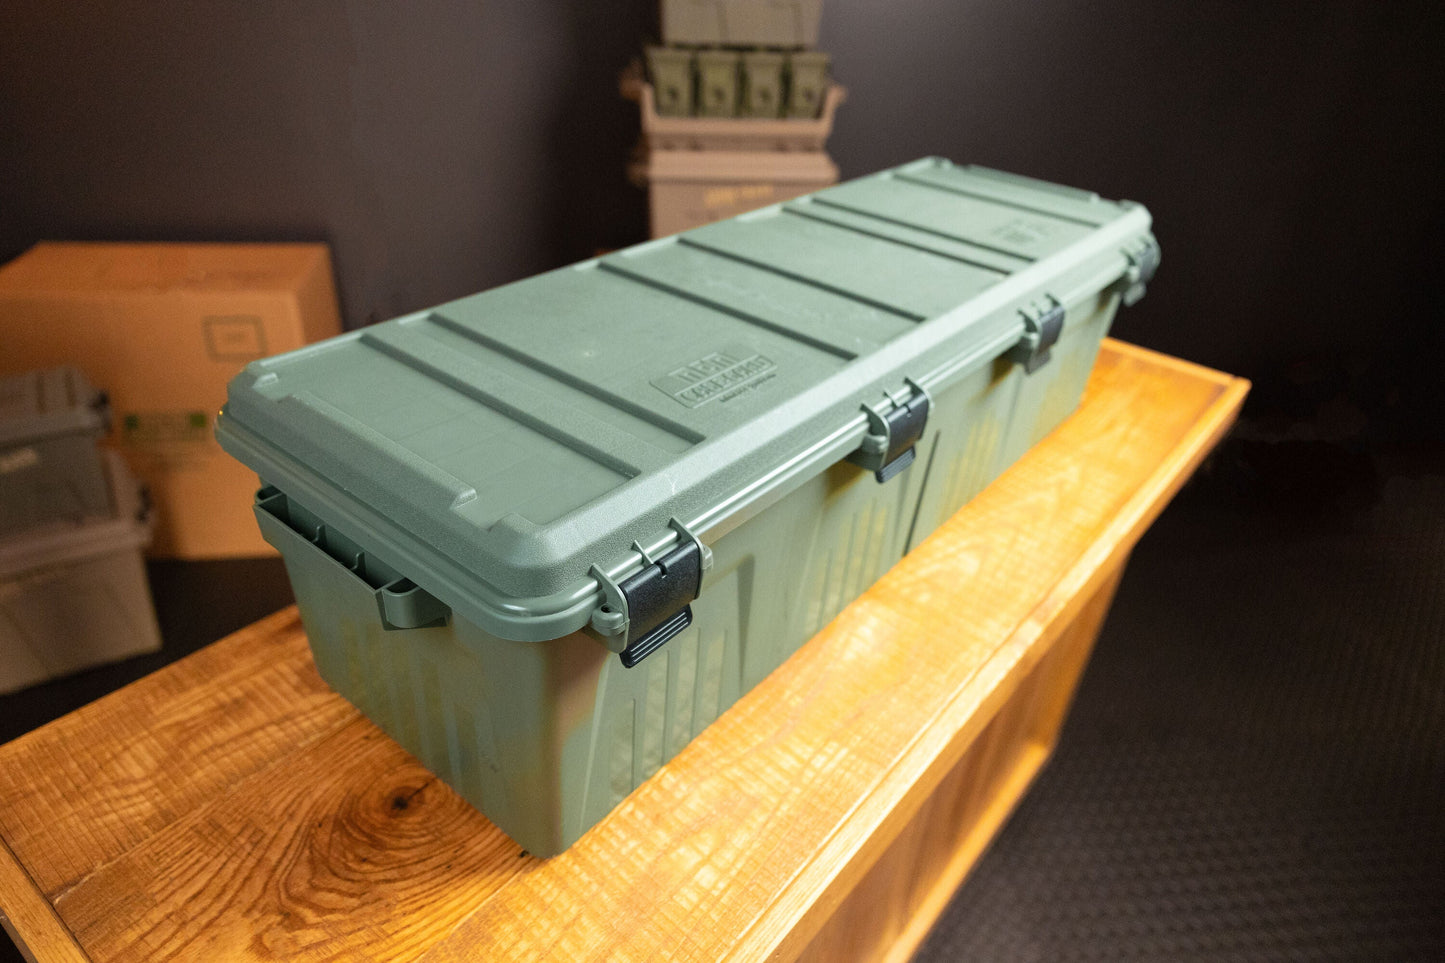 TRC39 - Tactical Rifle Crate - C